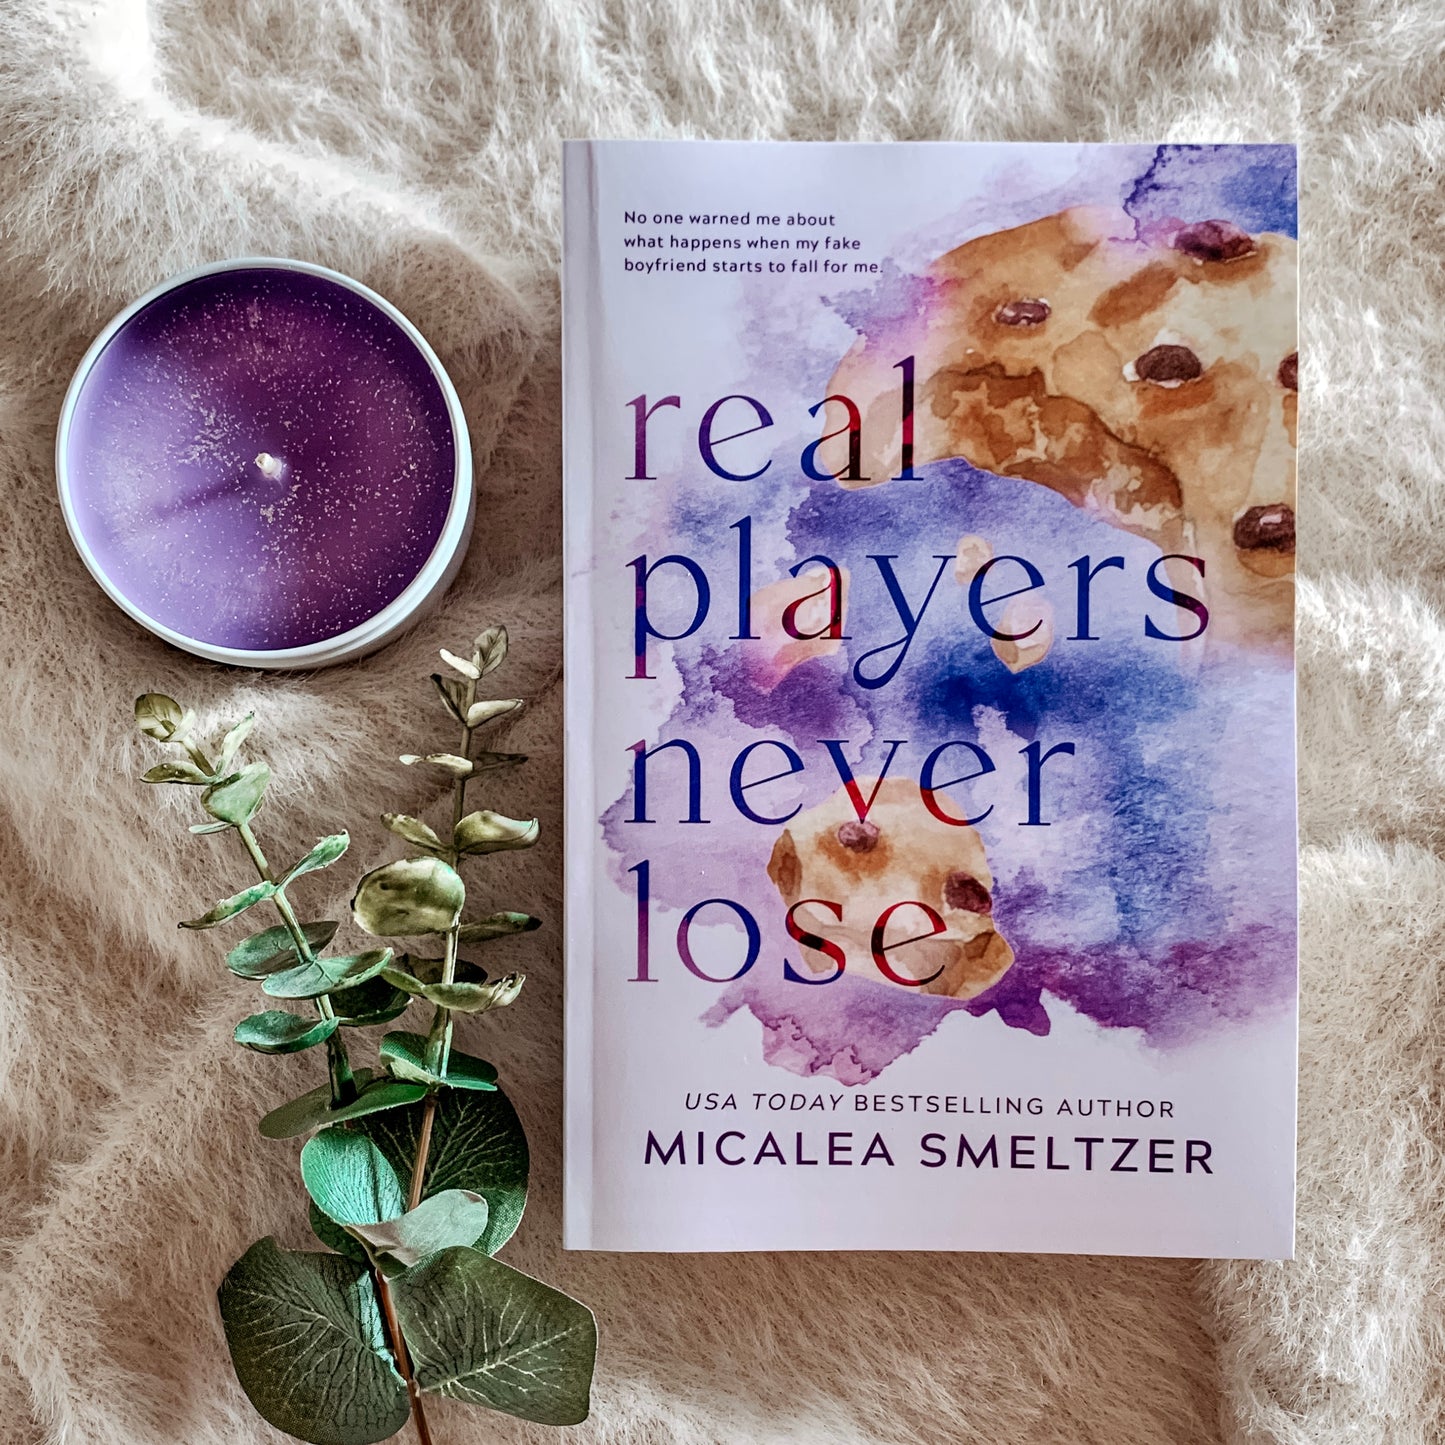 The Boys Series - Special Editions by Micalea Smeltzer